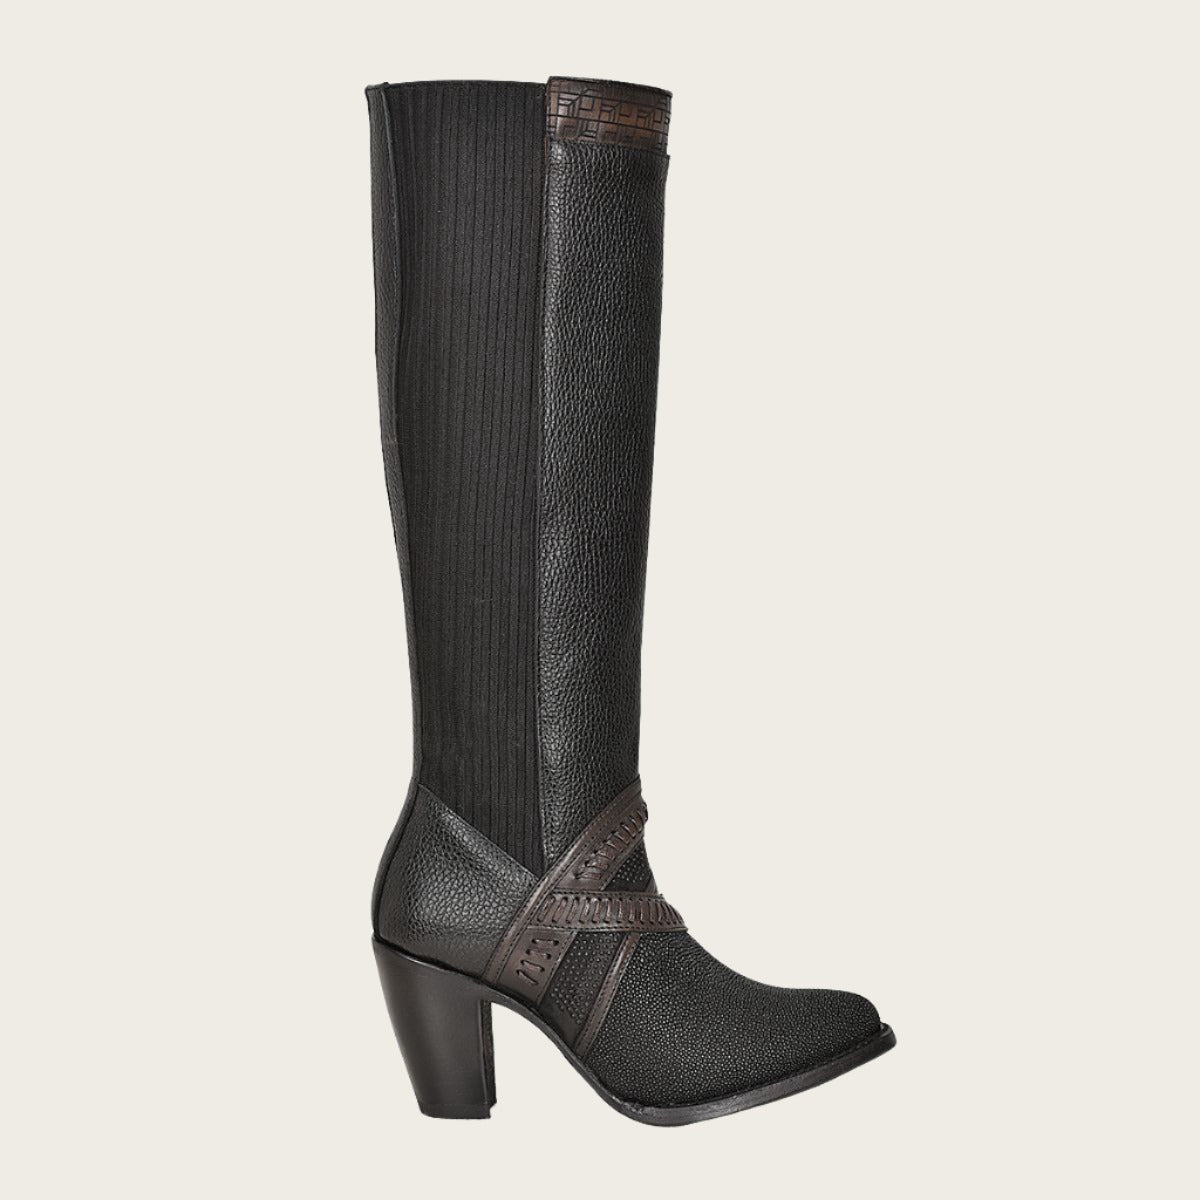 Black exotic riding boot with hand-woven details